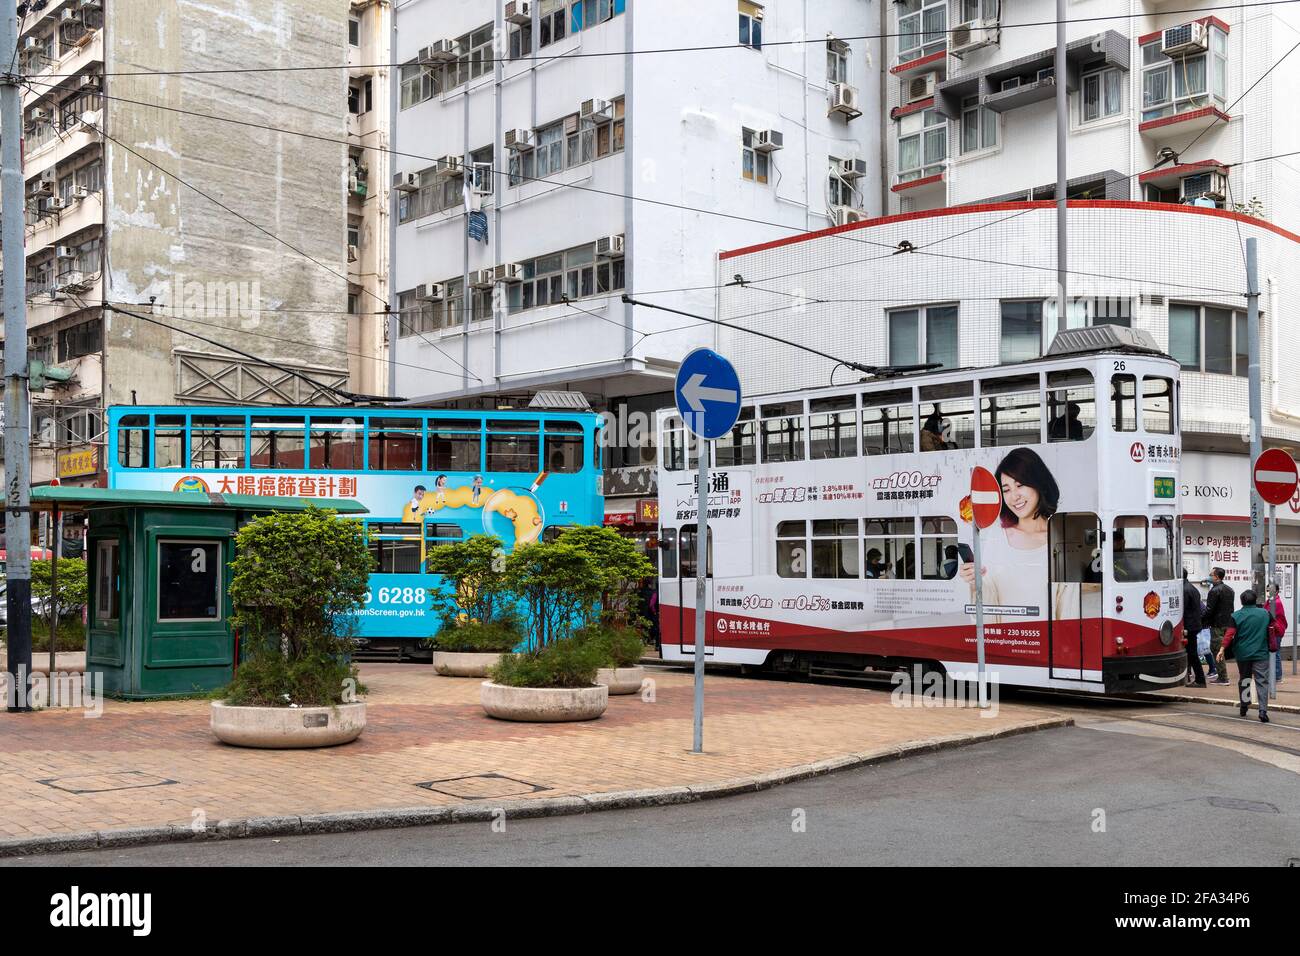 Hong Kong Tramways all electric narrow-gauge city transport system. Started in 1904 and has always been electric powered and environmentally clean. Stock Photo